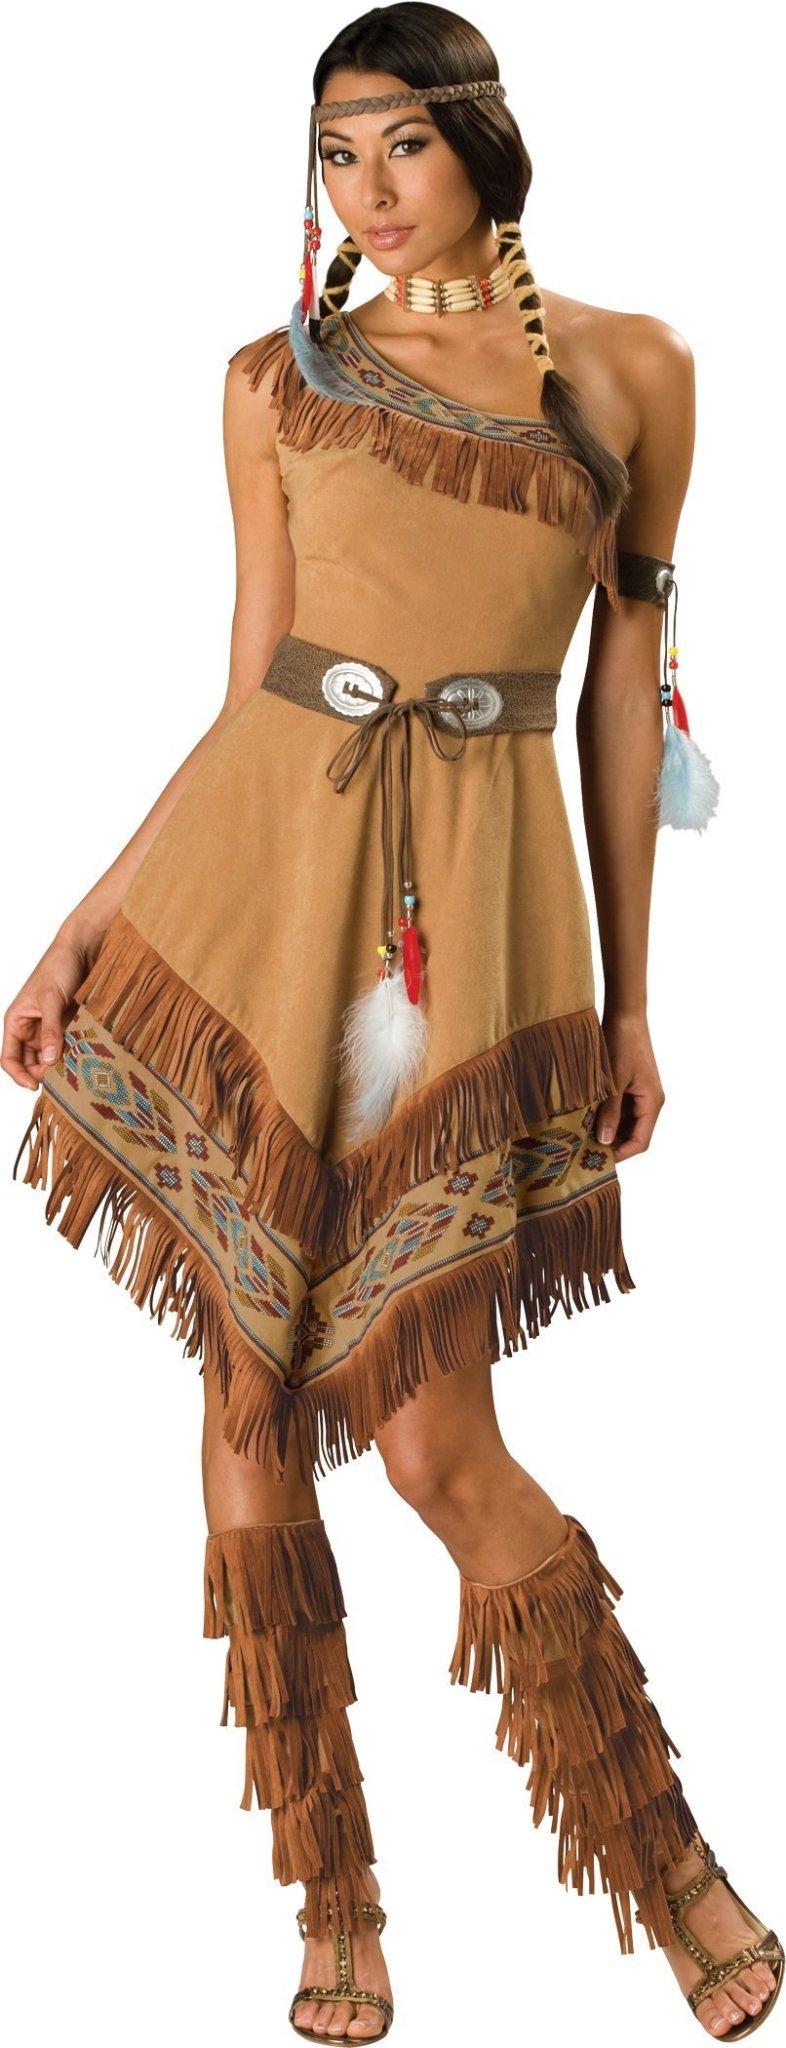 Indian Maiden Deluxe Costume - JJ's Party House